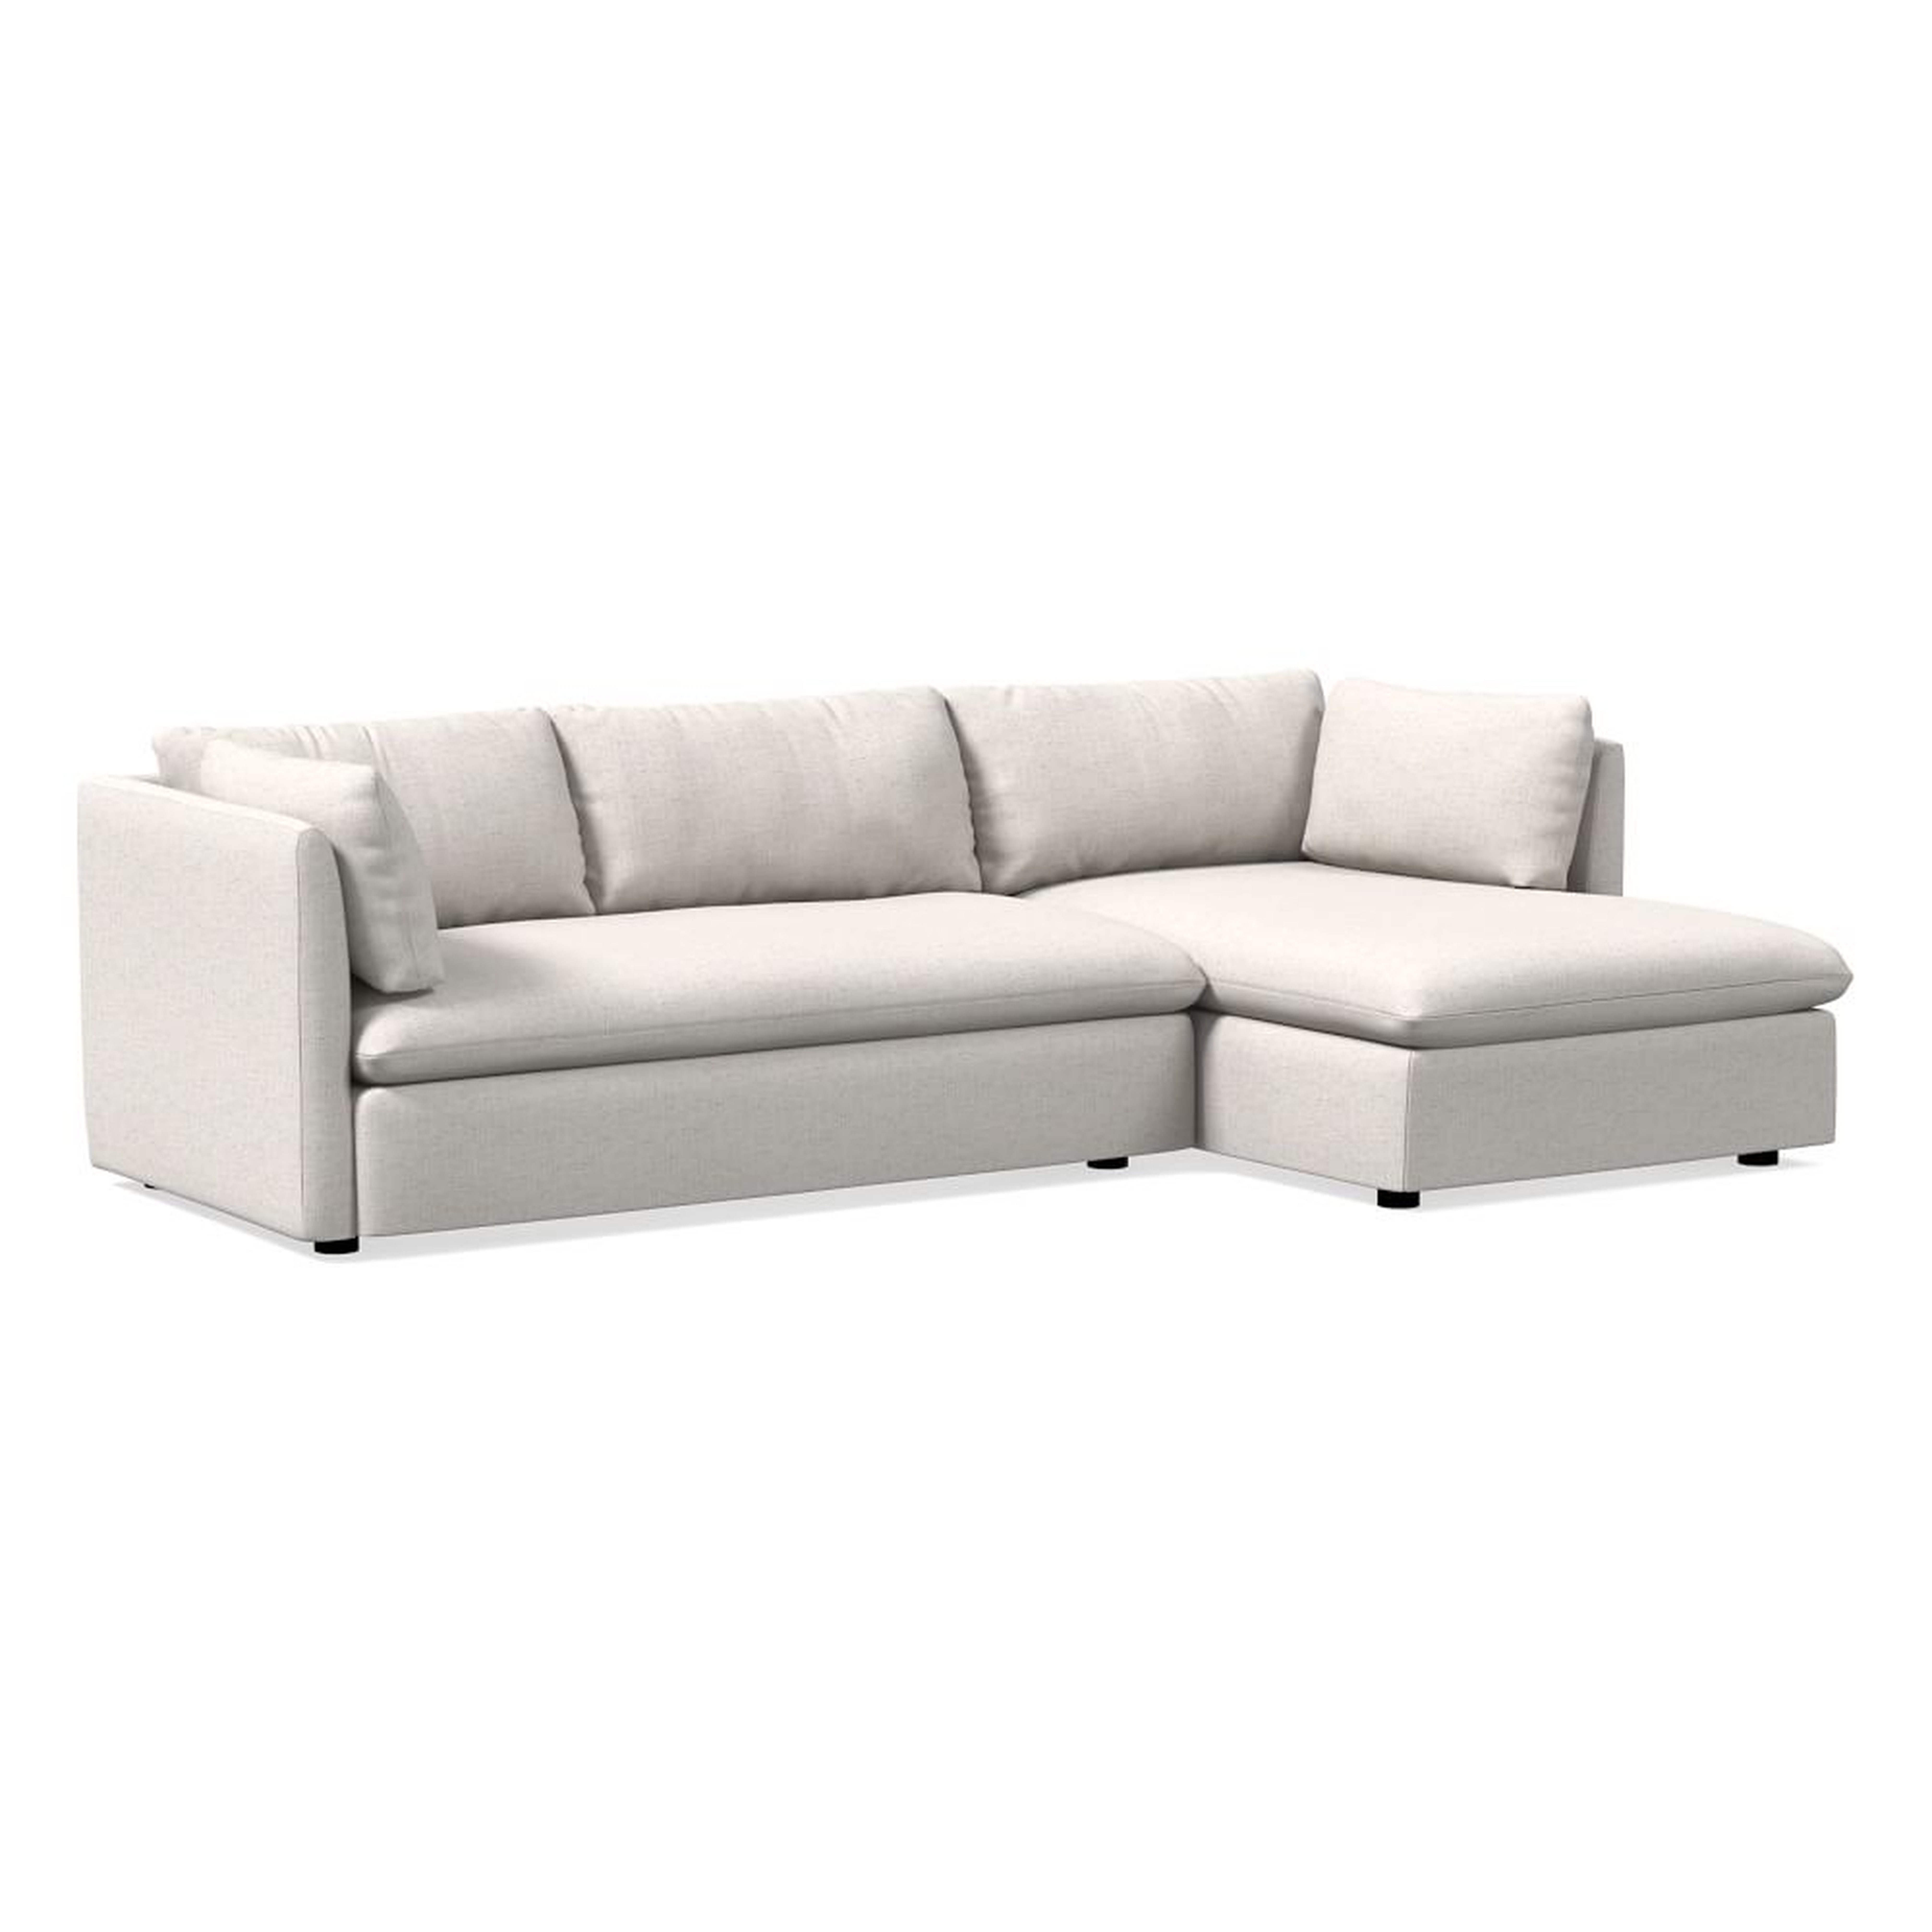 Shelter 105" Right 2-Piece Chaise Sectional, Performance Coastal Linen, White - West Elm